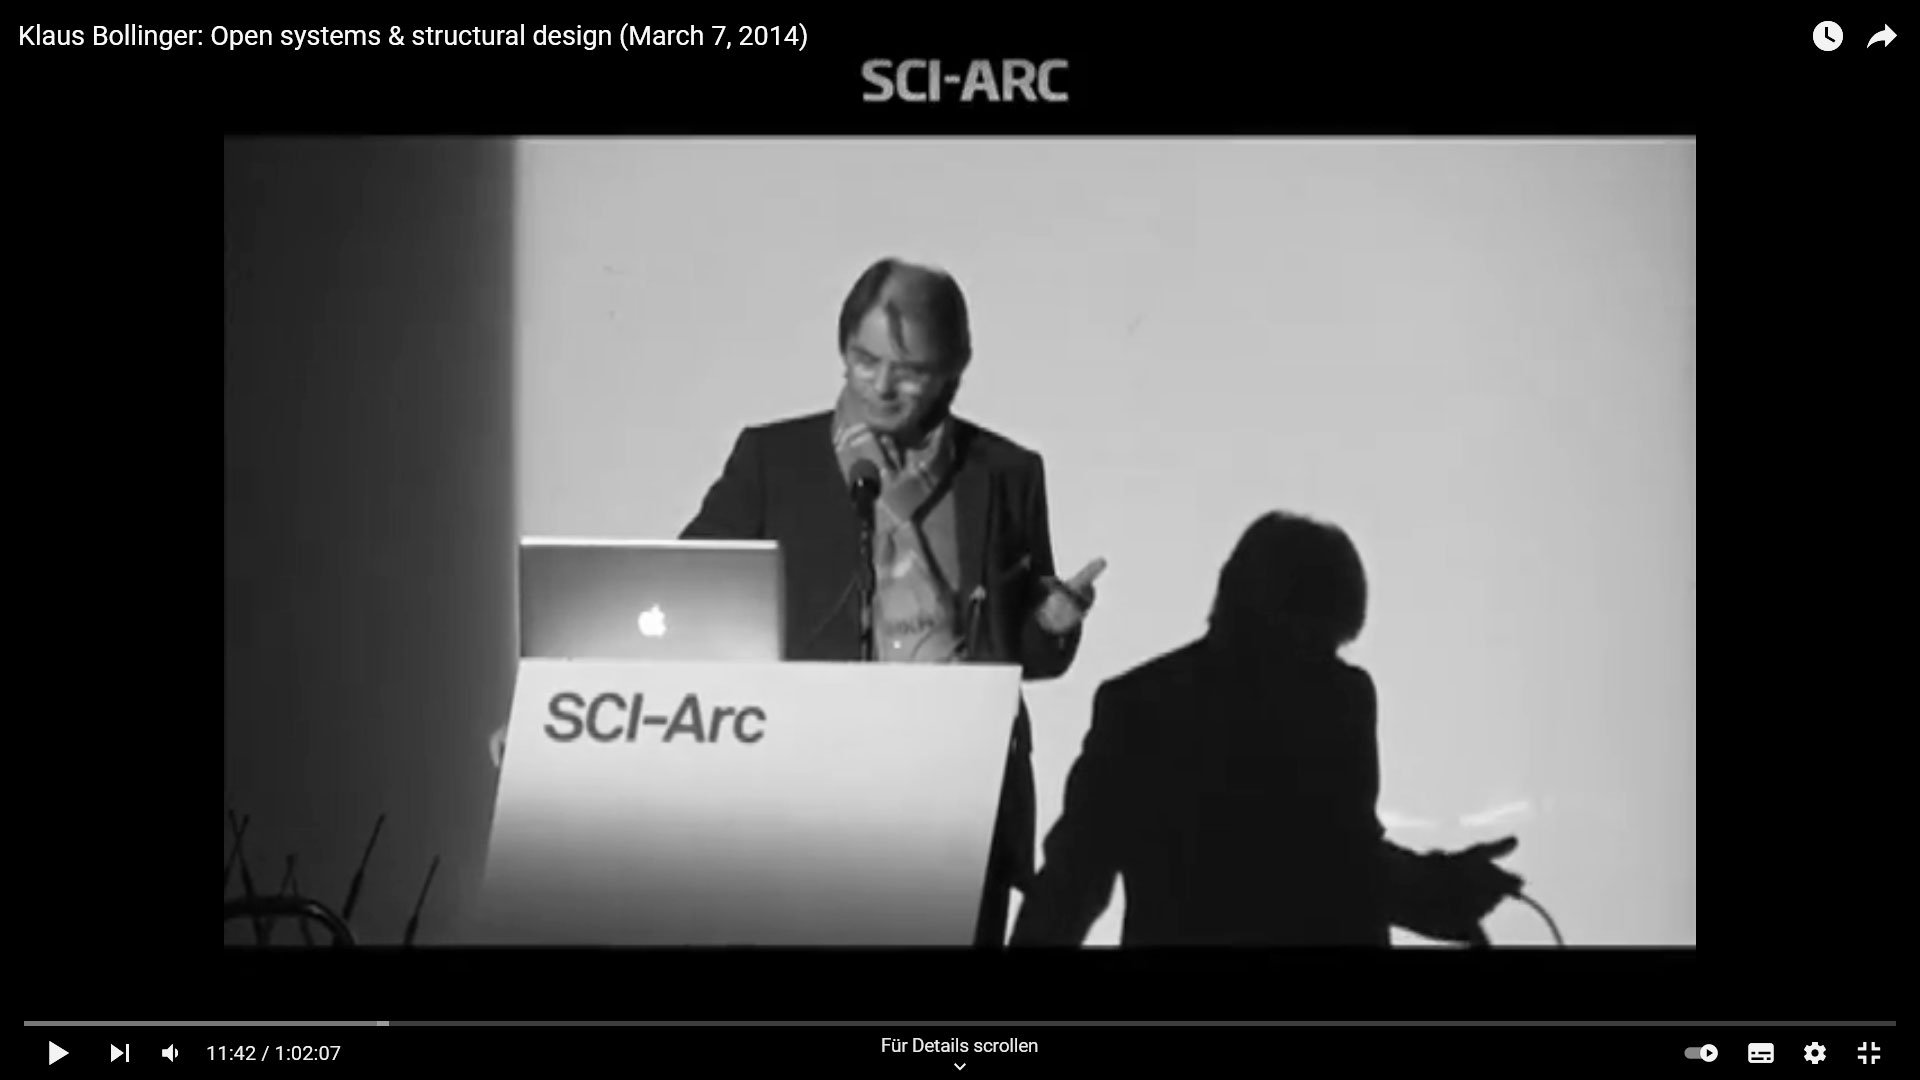 SCI-ARC: Open systems & structural design, lecture by Klaus Bollinger